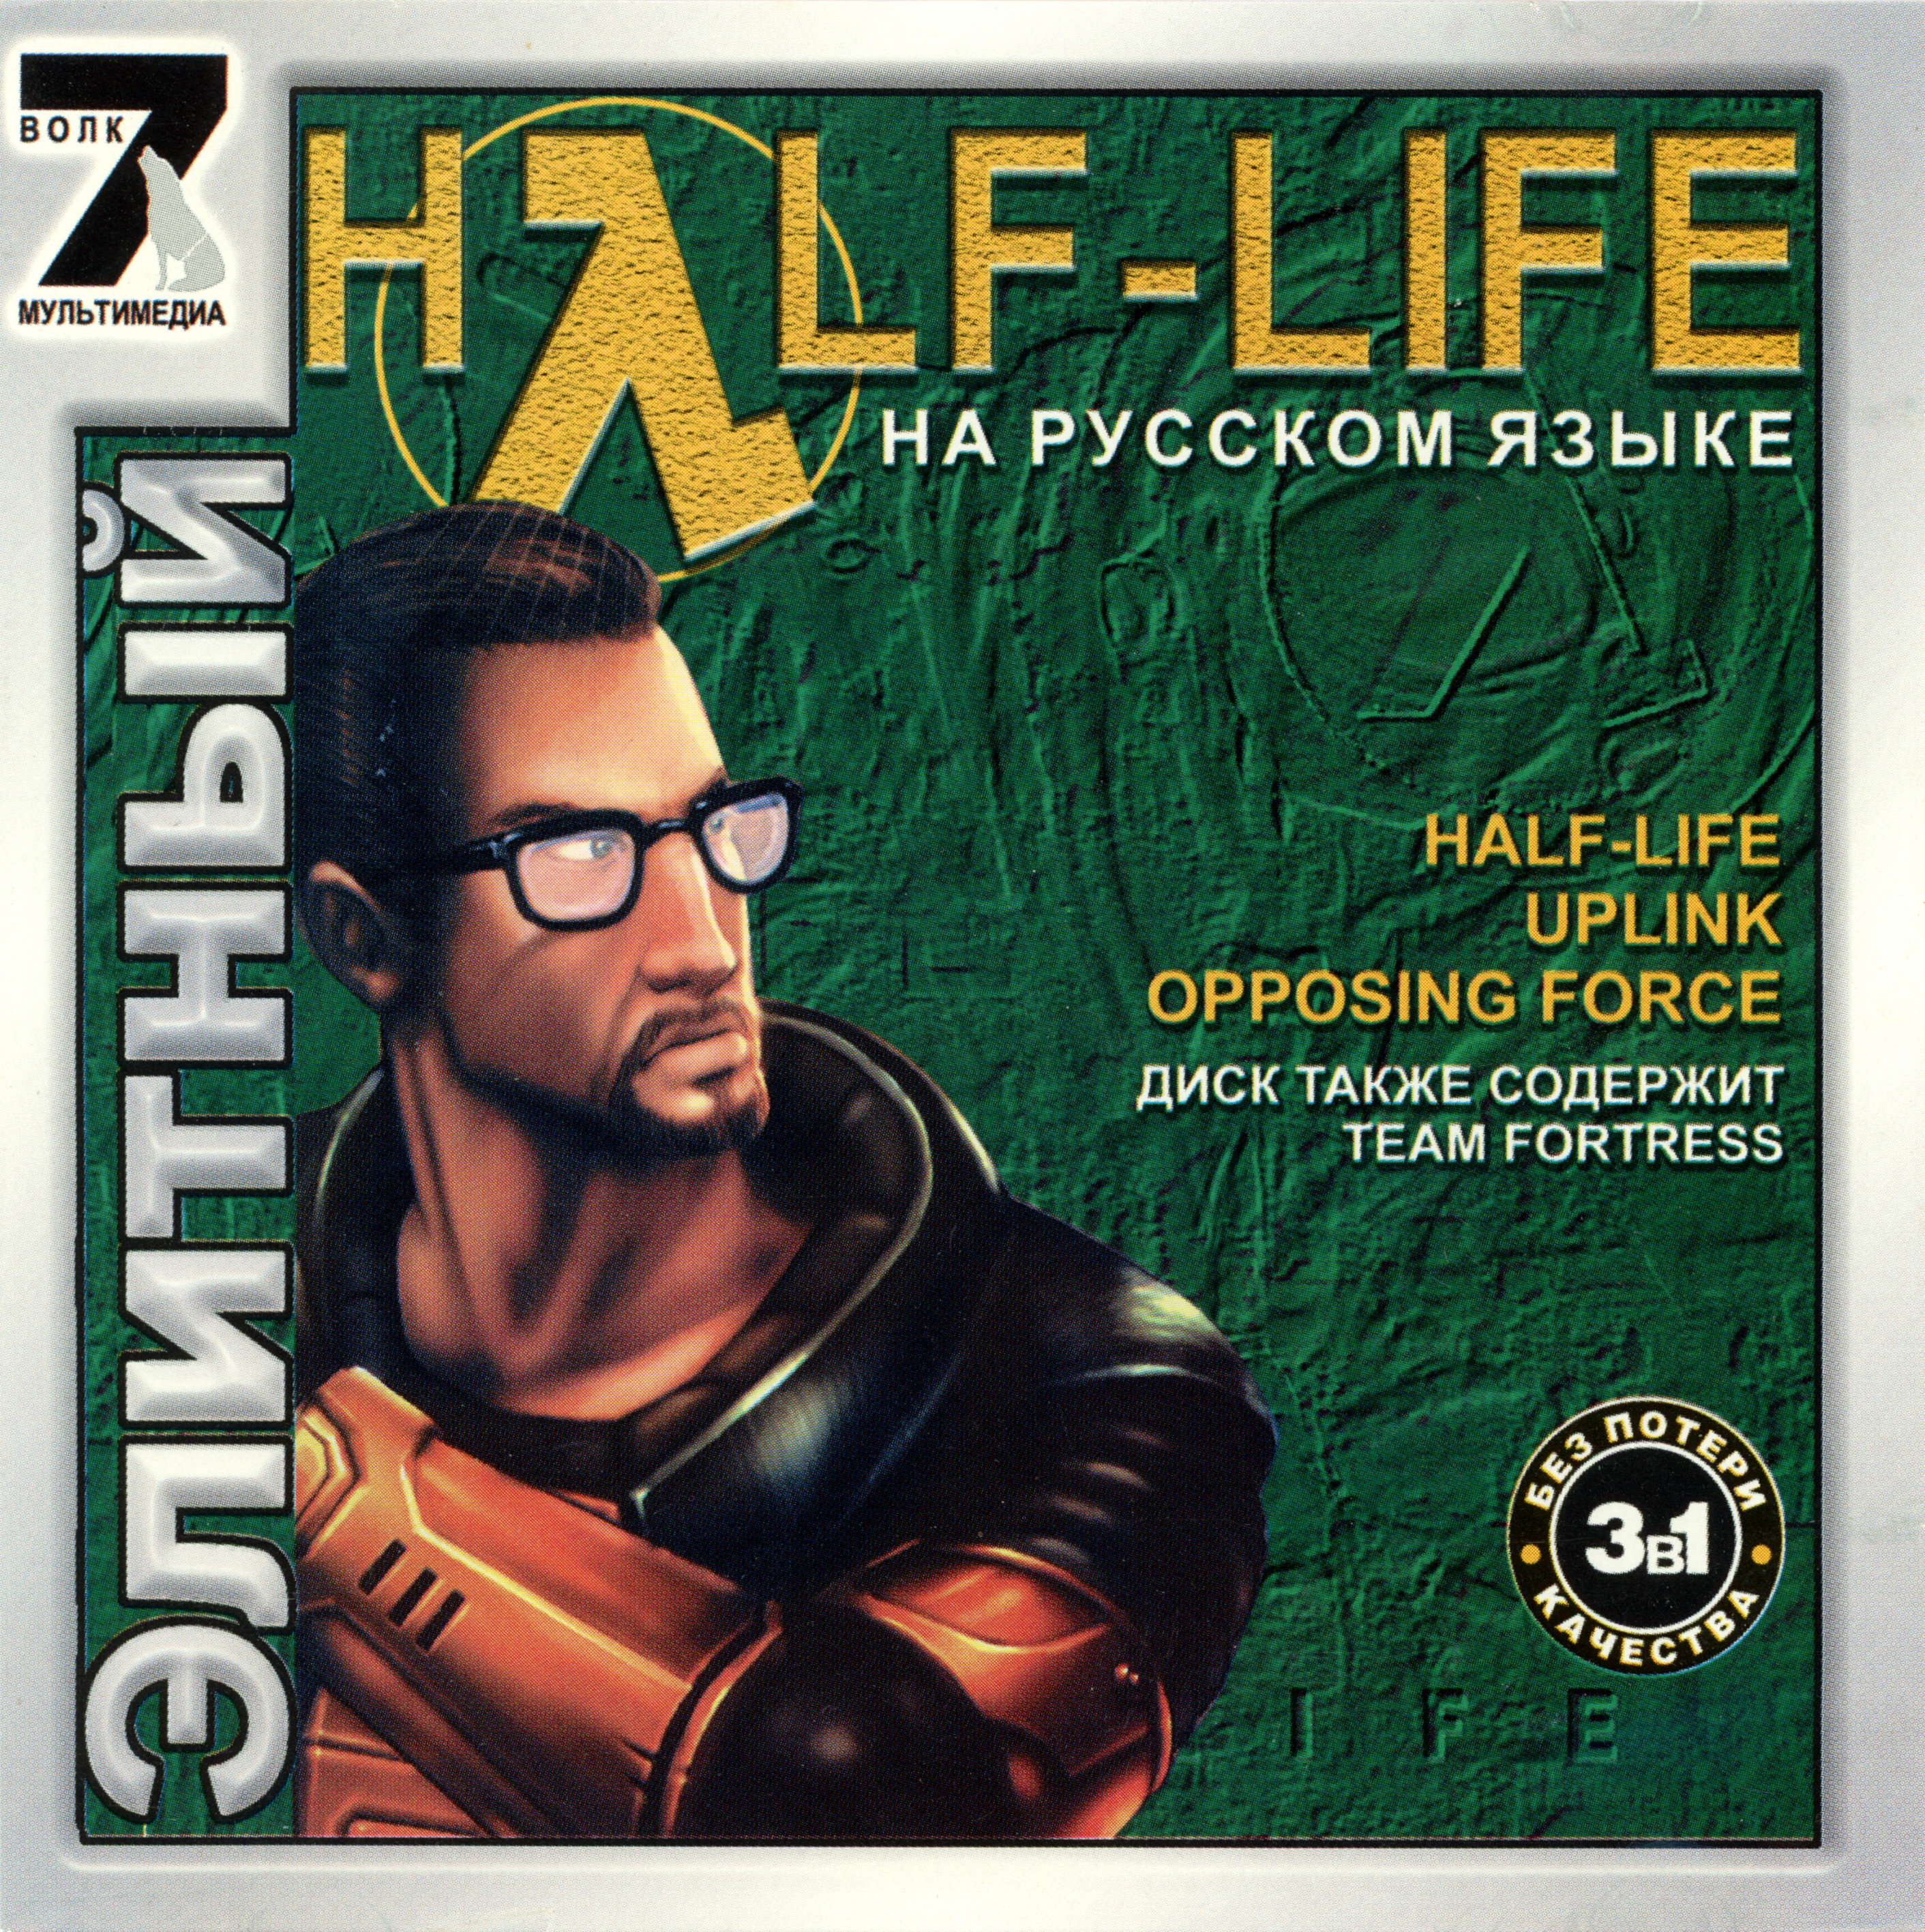 Type the cd key displayed on the half life cd case фото 30